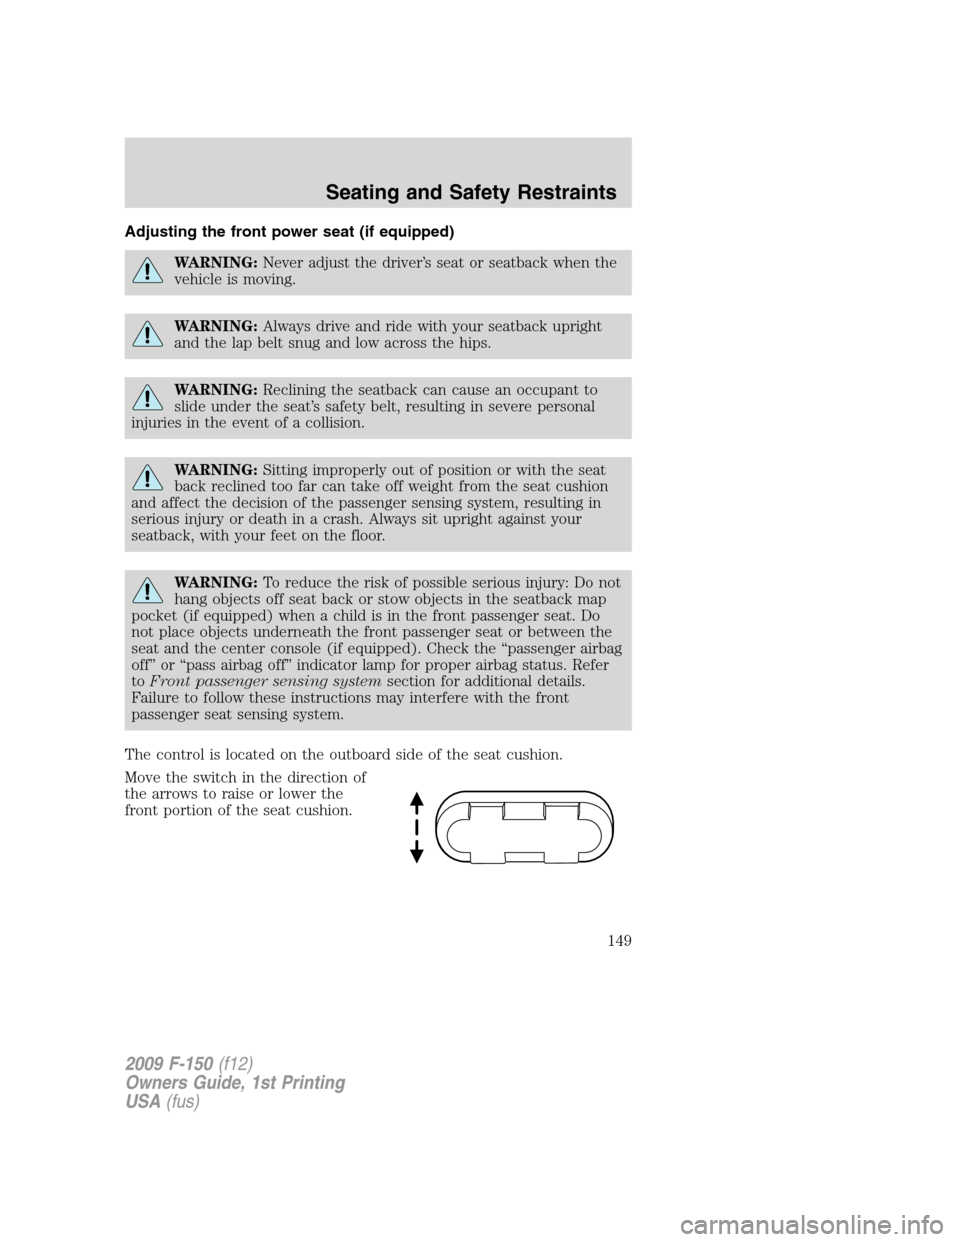 FORD F150 2009 12.G Owners Manual Adjusting the front power seat (if equipped)
WARNING:Never adjust the driver’s seat or seatback when the
vehicle is moving.
WARNING:Always drive and ride with your seatback upright
and the lap belt 